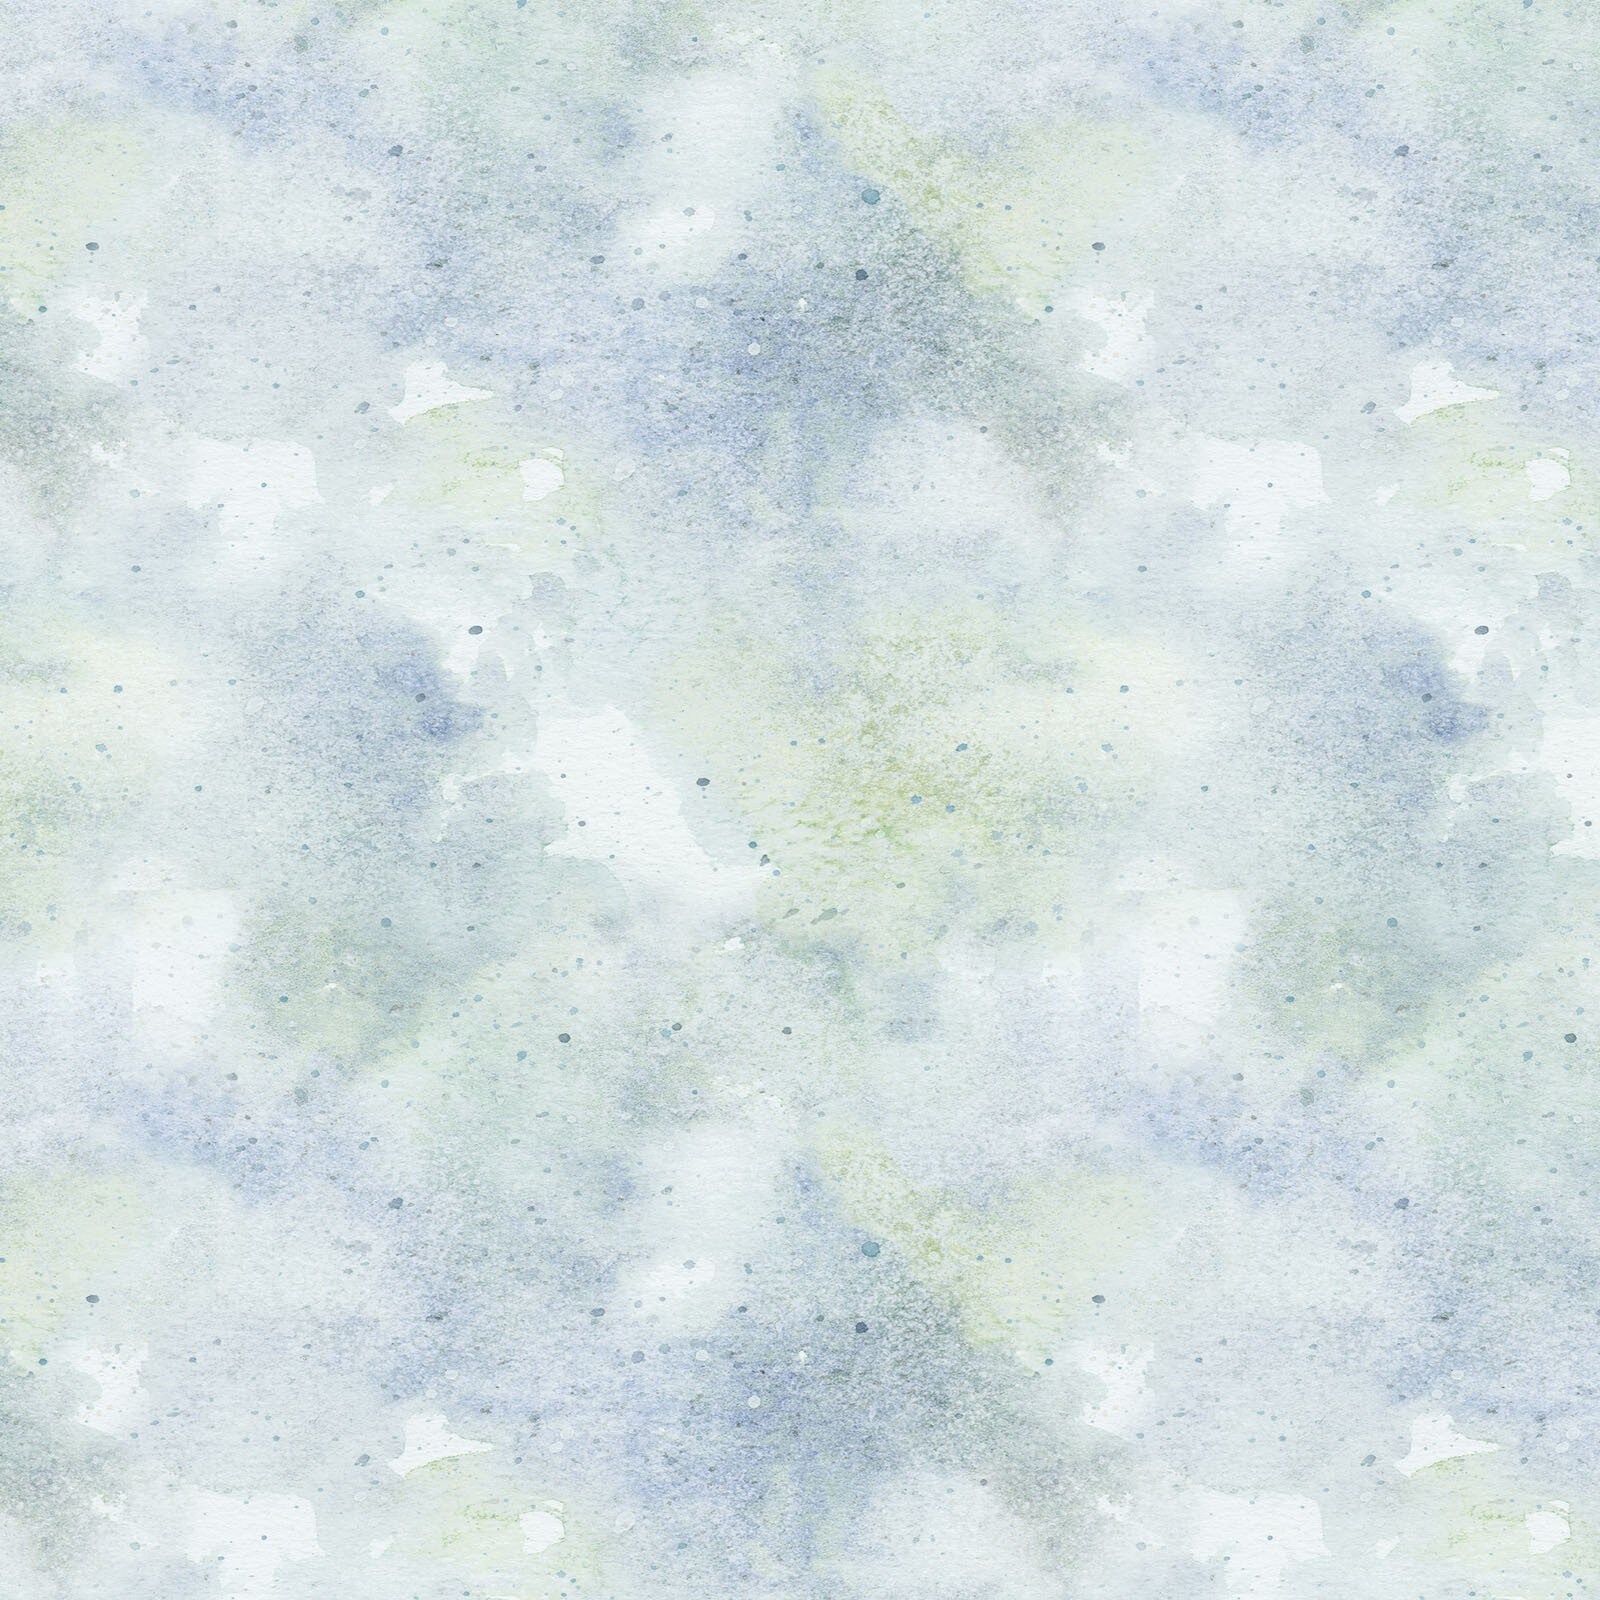 P&B Textiles - By The Sea - Radiating Droplets - White, Fabric by the Yard